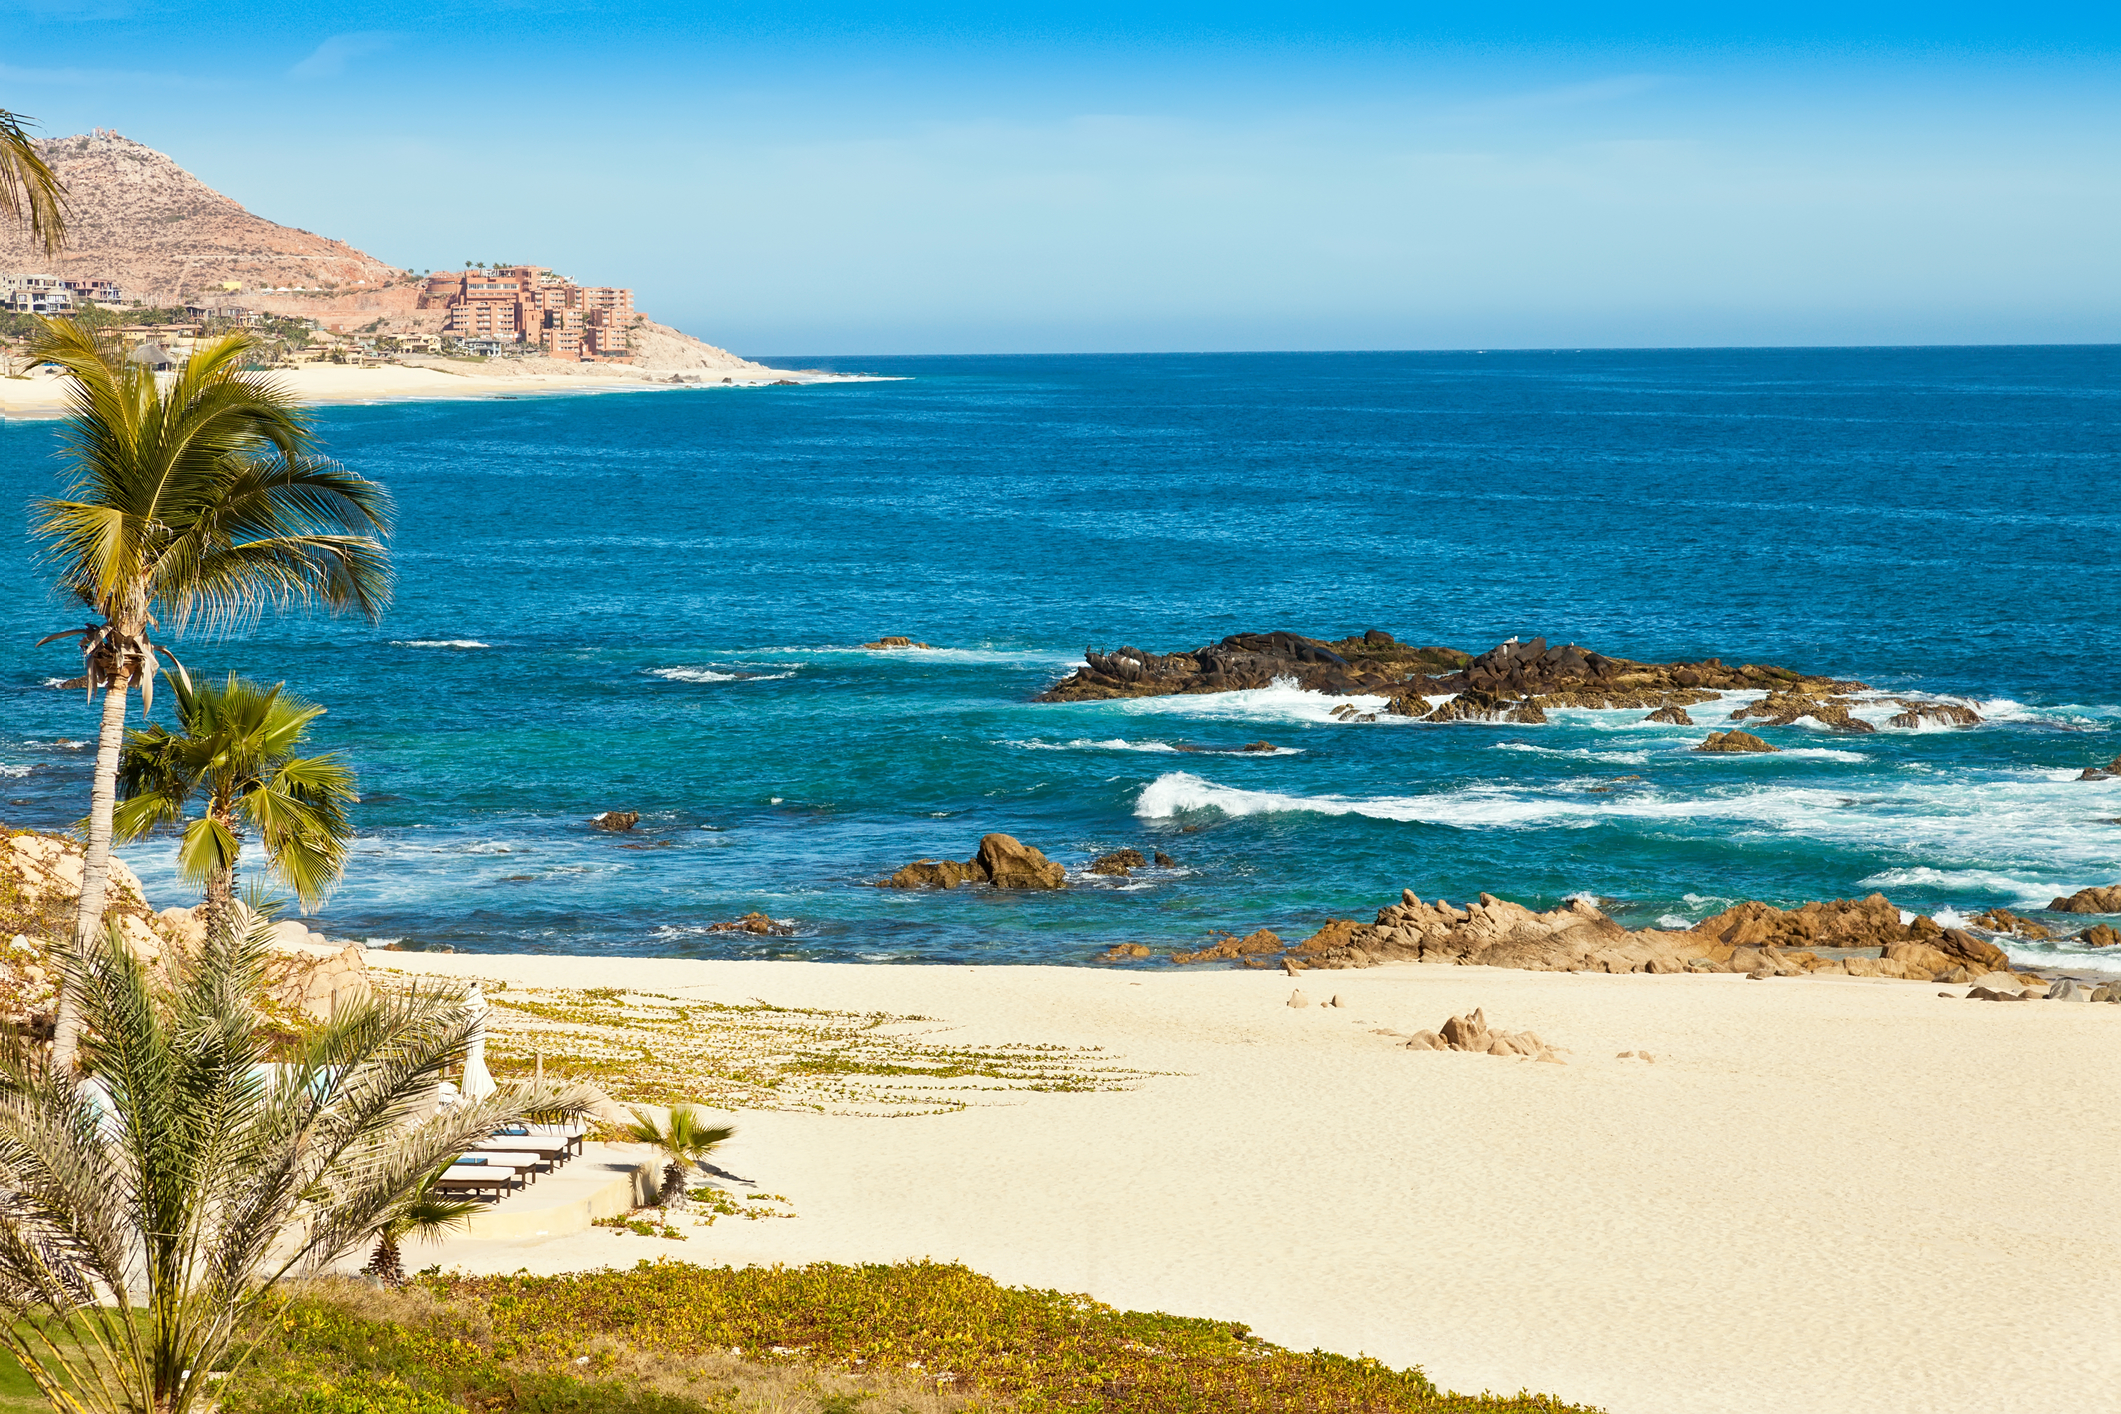 Flights to Cabo in the $200s round-trip!